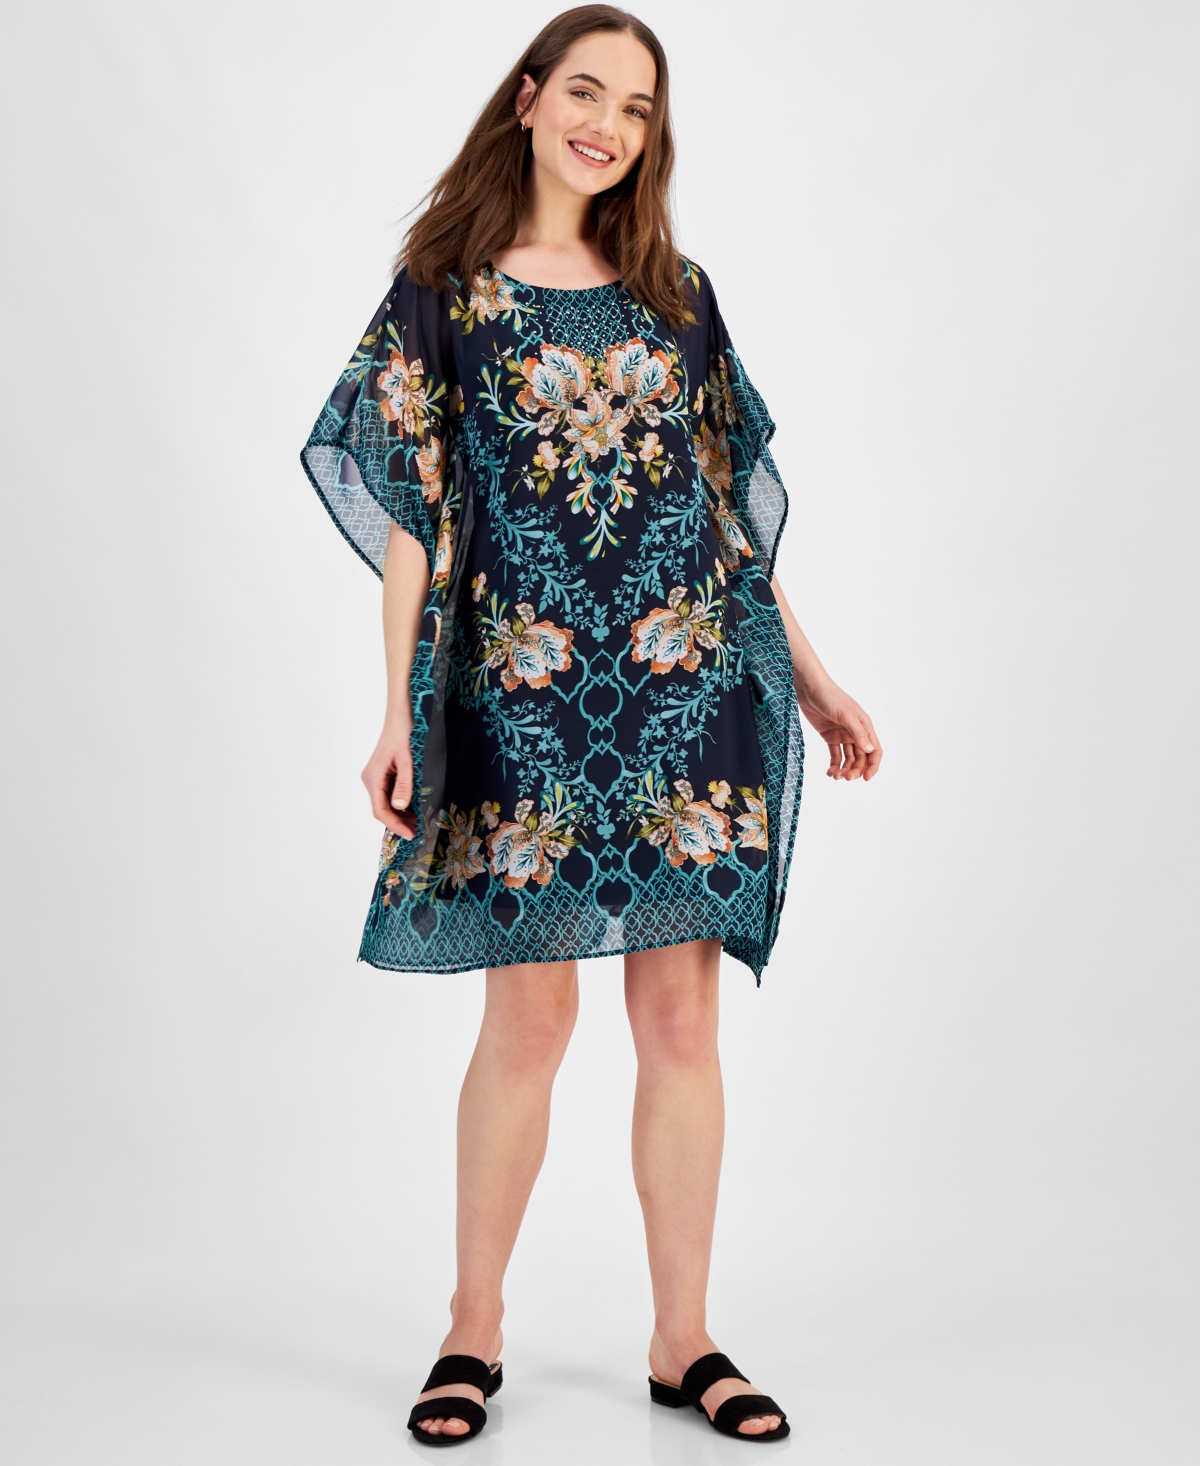 Women's Embellished Printed Caftan Dress, Created for Macy's - Blossom Berry Combo